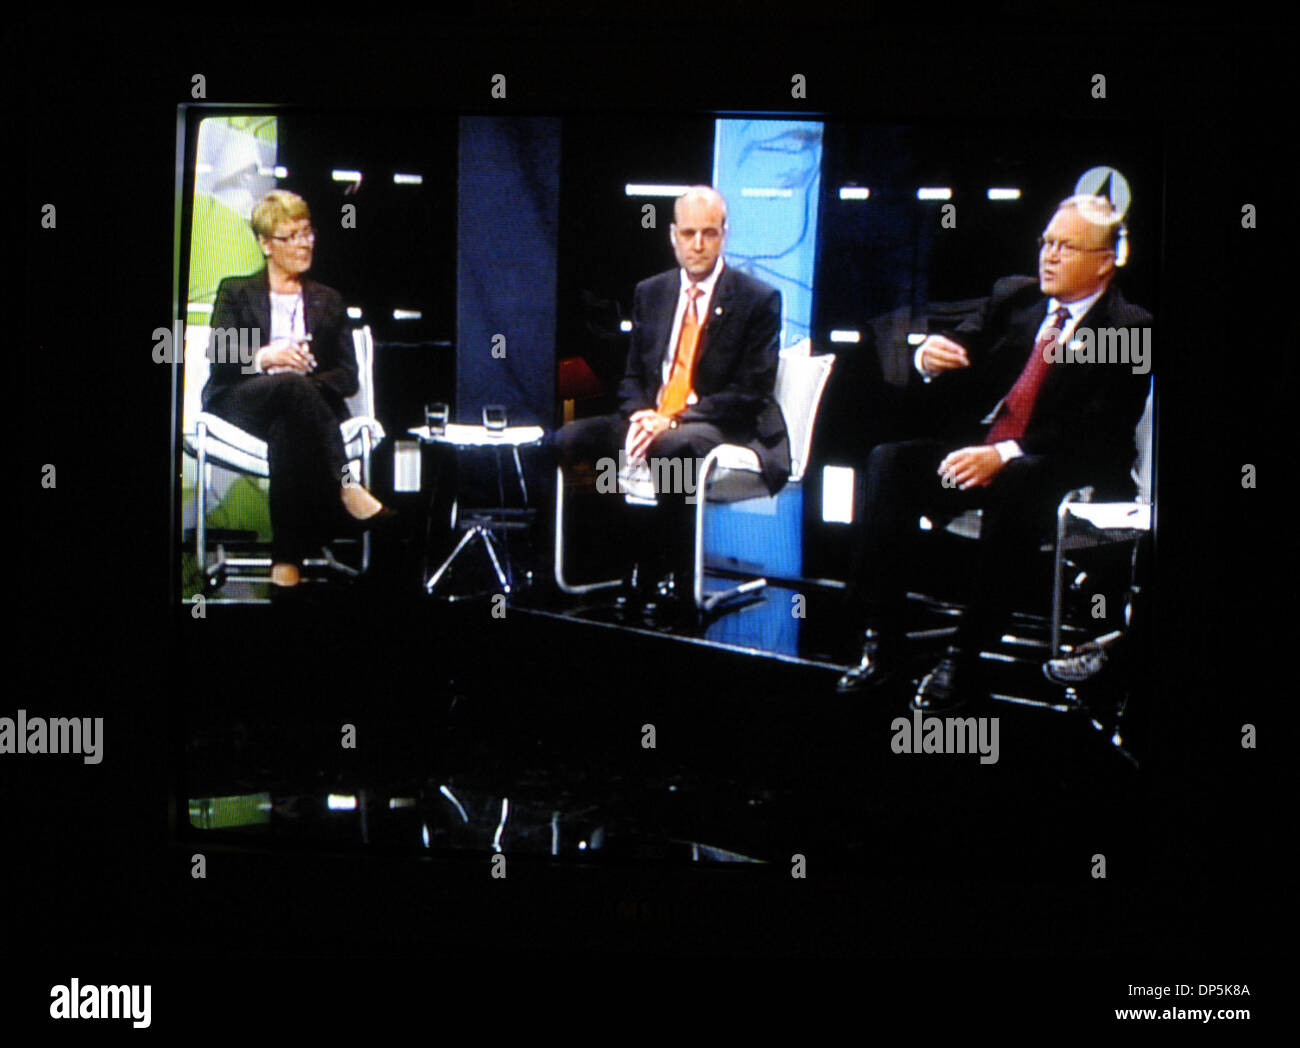 Sep 18, 2006; Stockholm, SWEDEN; TV4 Screenshot of Prime Minister candidates left to right: MAUD OLOFSSON, of the Center Party, FREDRIK REINFELDT, of the Moderate Party and GORAN PERSSON, incumbent Prime Minister of the Social Democratic Party during debate broadcast in Sweden. Reinfeldt has started work on forming a coalition government in Sweden on today after ending 12 years of  Stock Photo